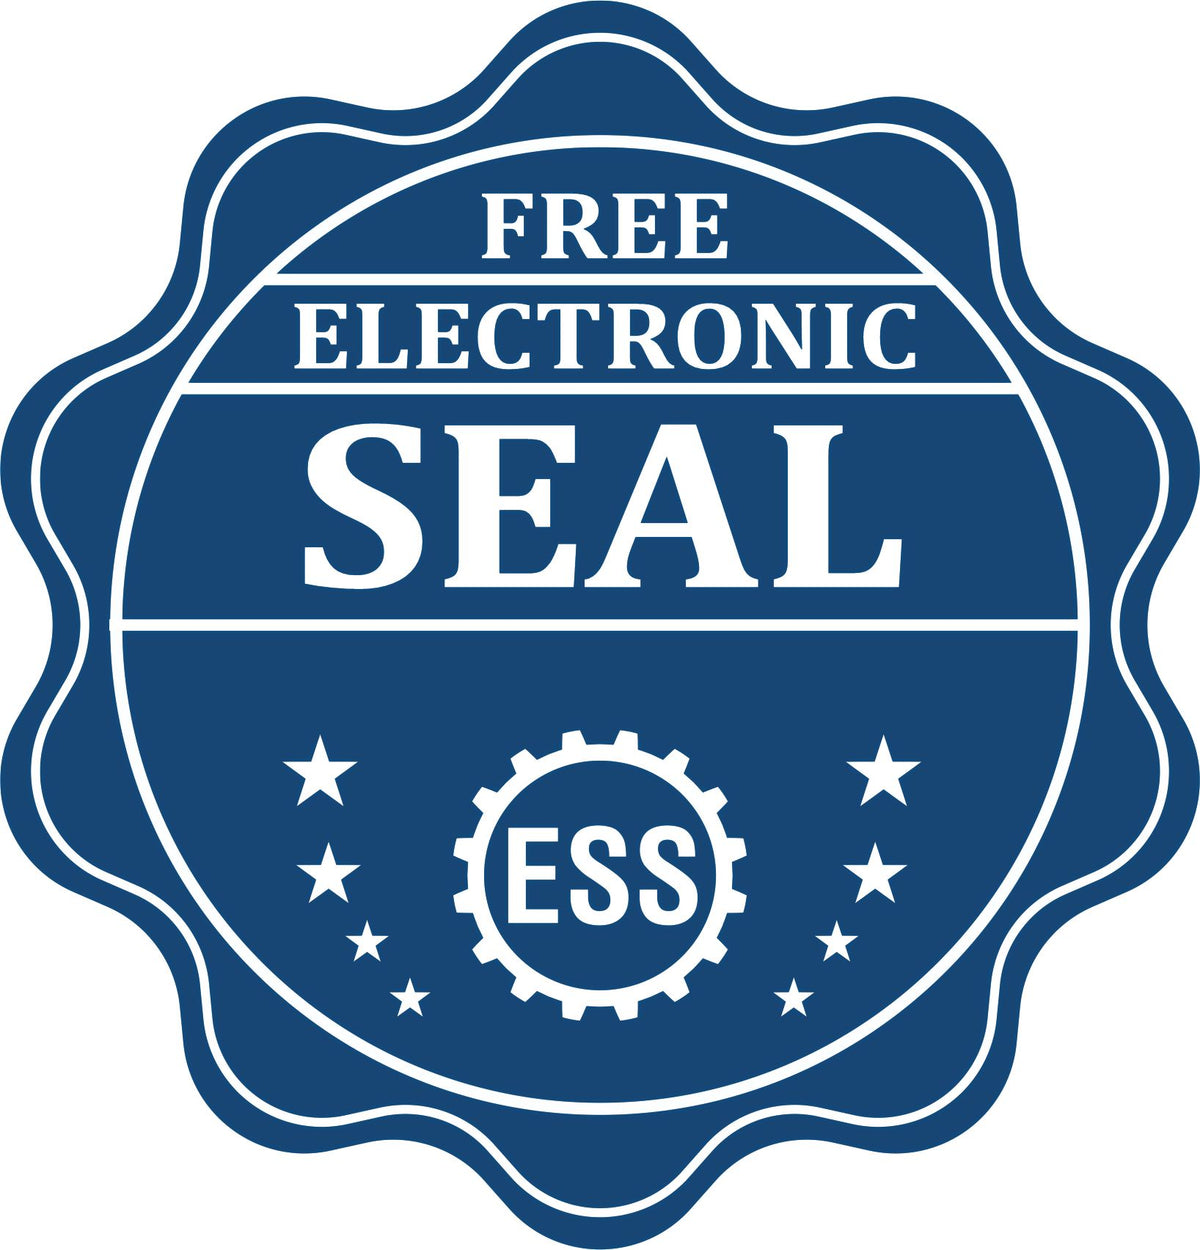 A badge showing a free electronic seal for the Premium MaxLight Pre-Inked District of Columbia Landscape Architectural Stamp with stars and the ESS gear on the emblem.